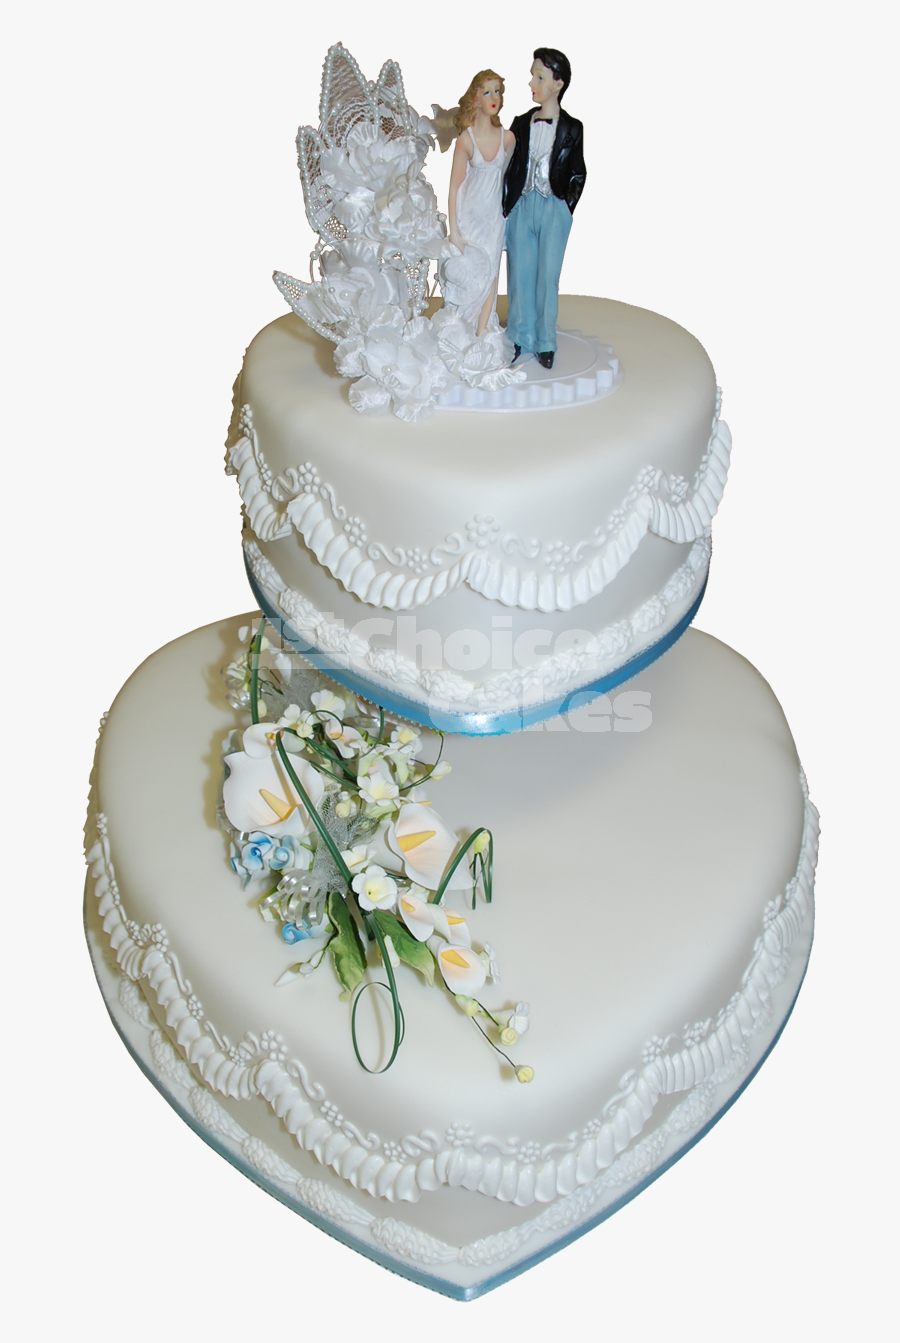 Wedding Cake Png Hd - Wedding Cake Images Hd, Transparent Clipart